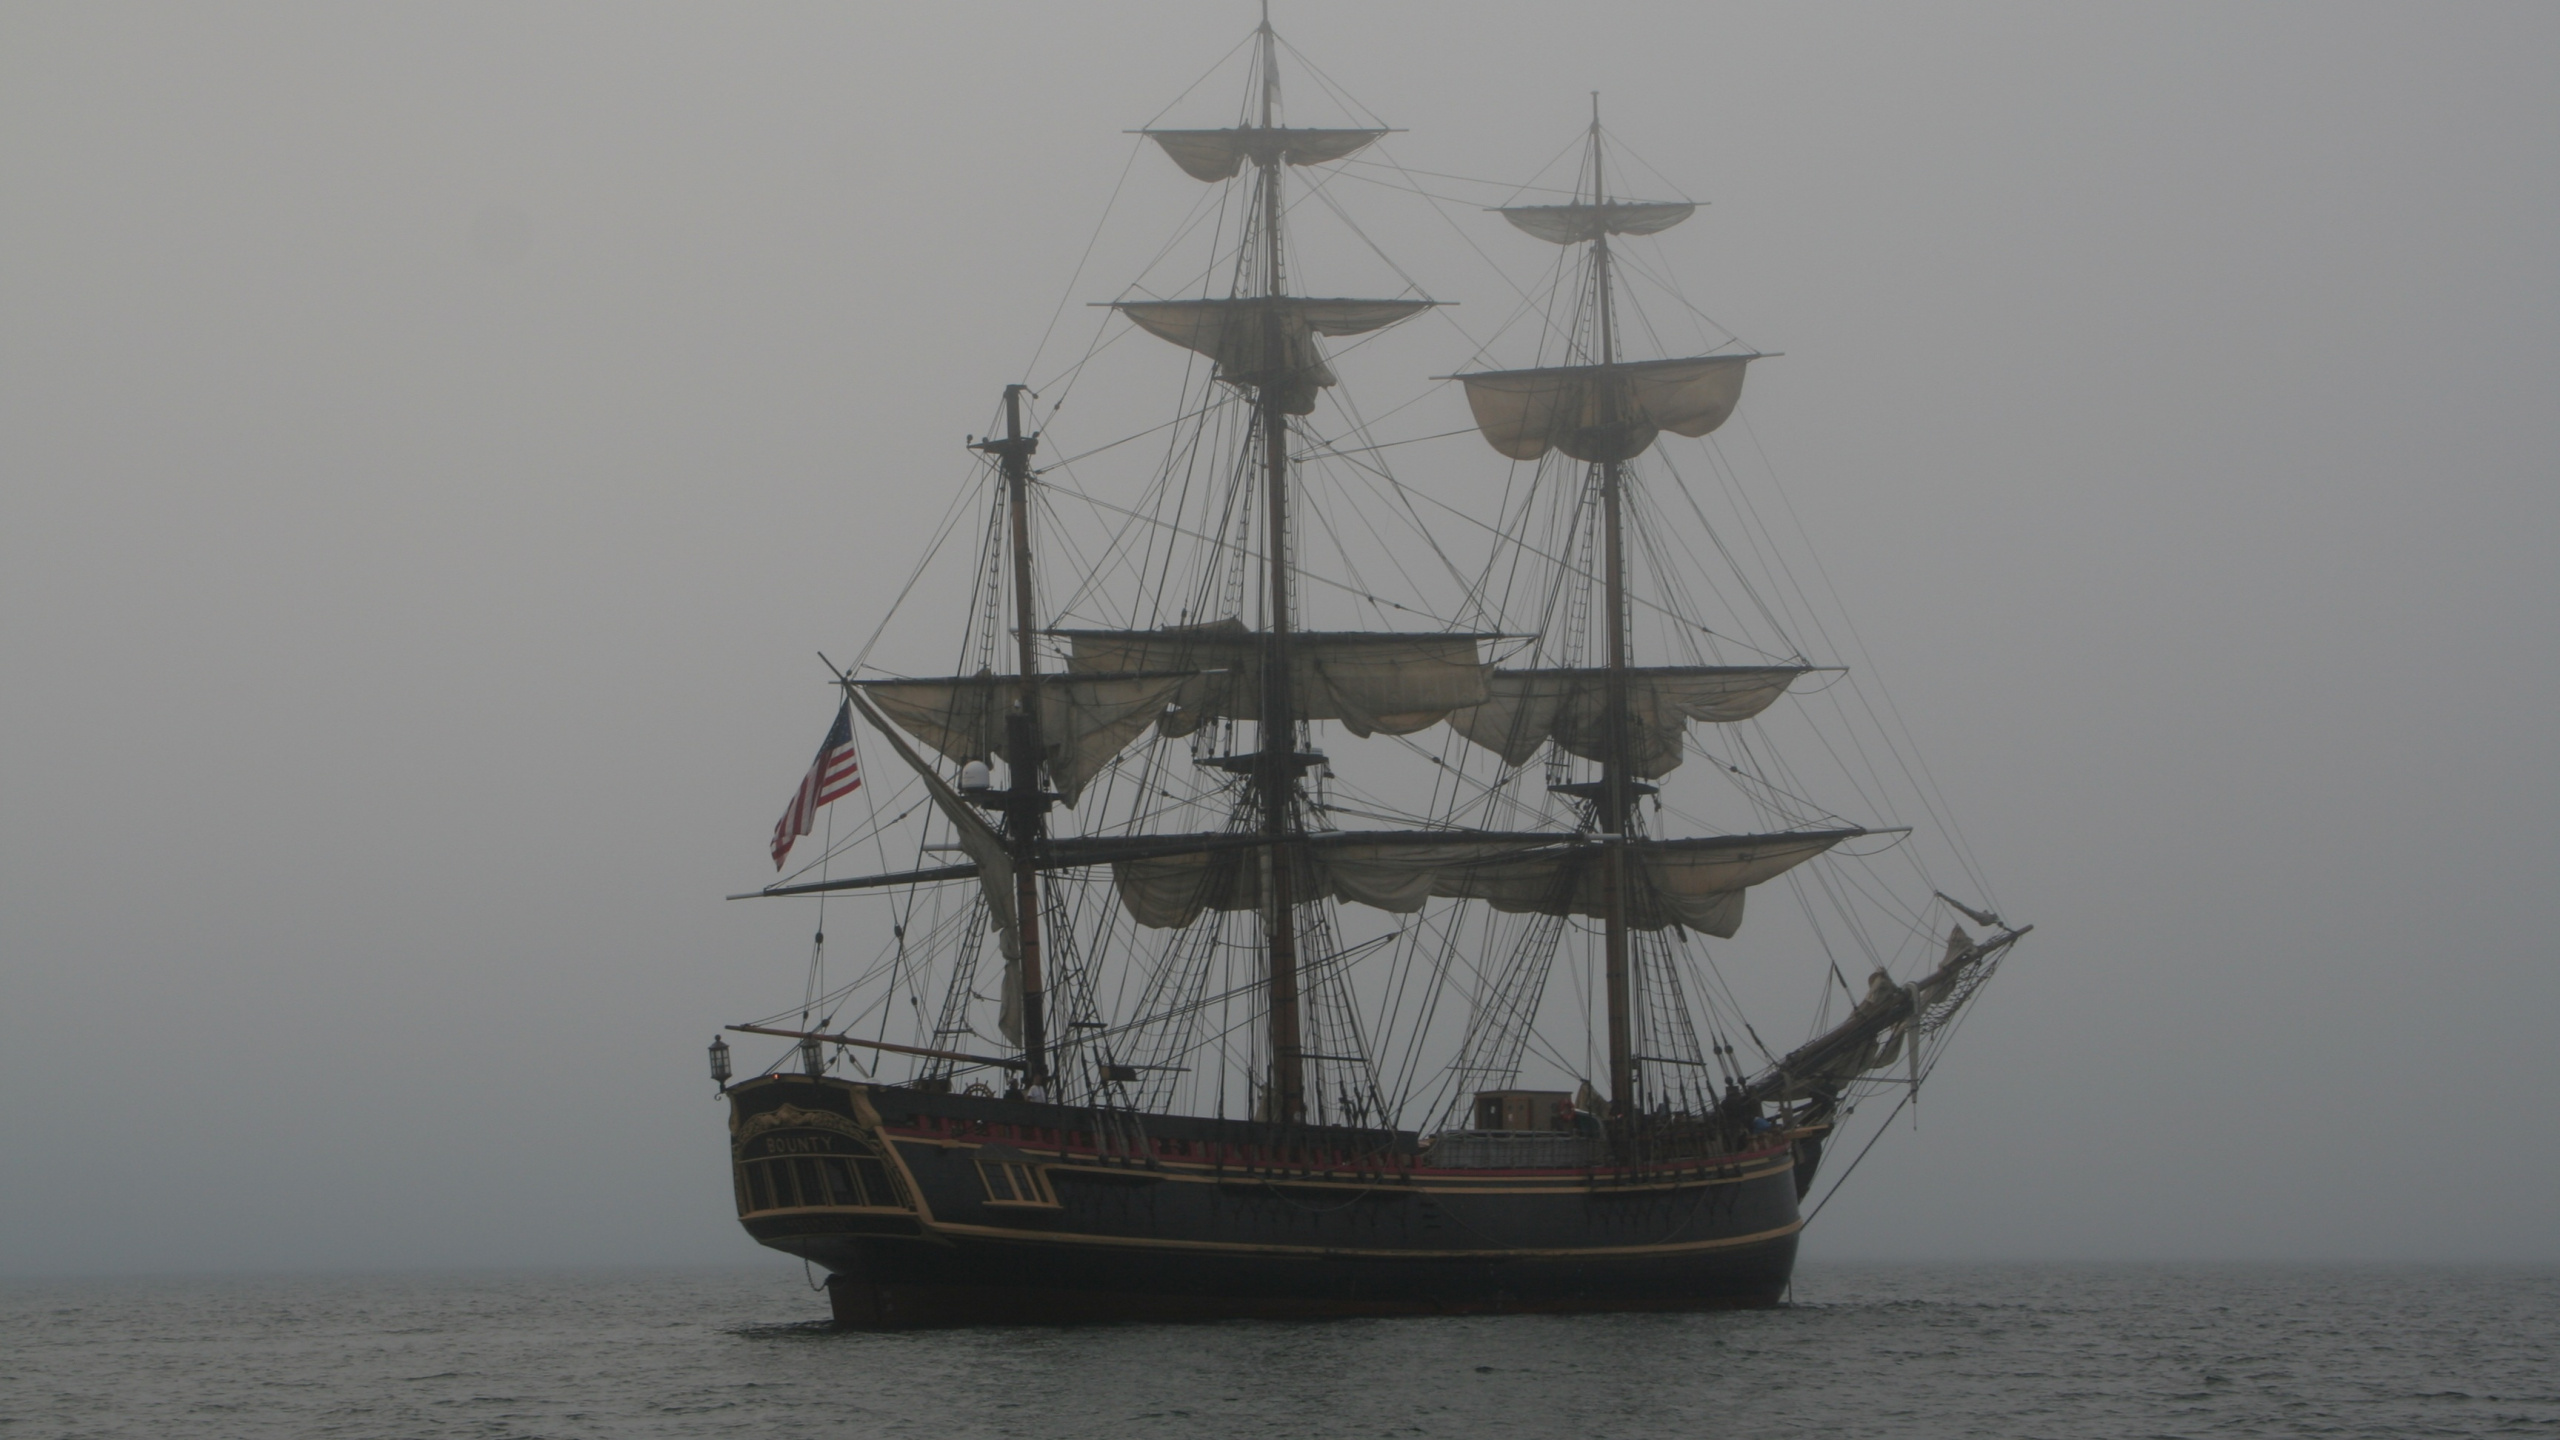 Brown and White Galleon Ship on Sea During Daytime. Wallpaper in 2560x1440 Resolution